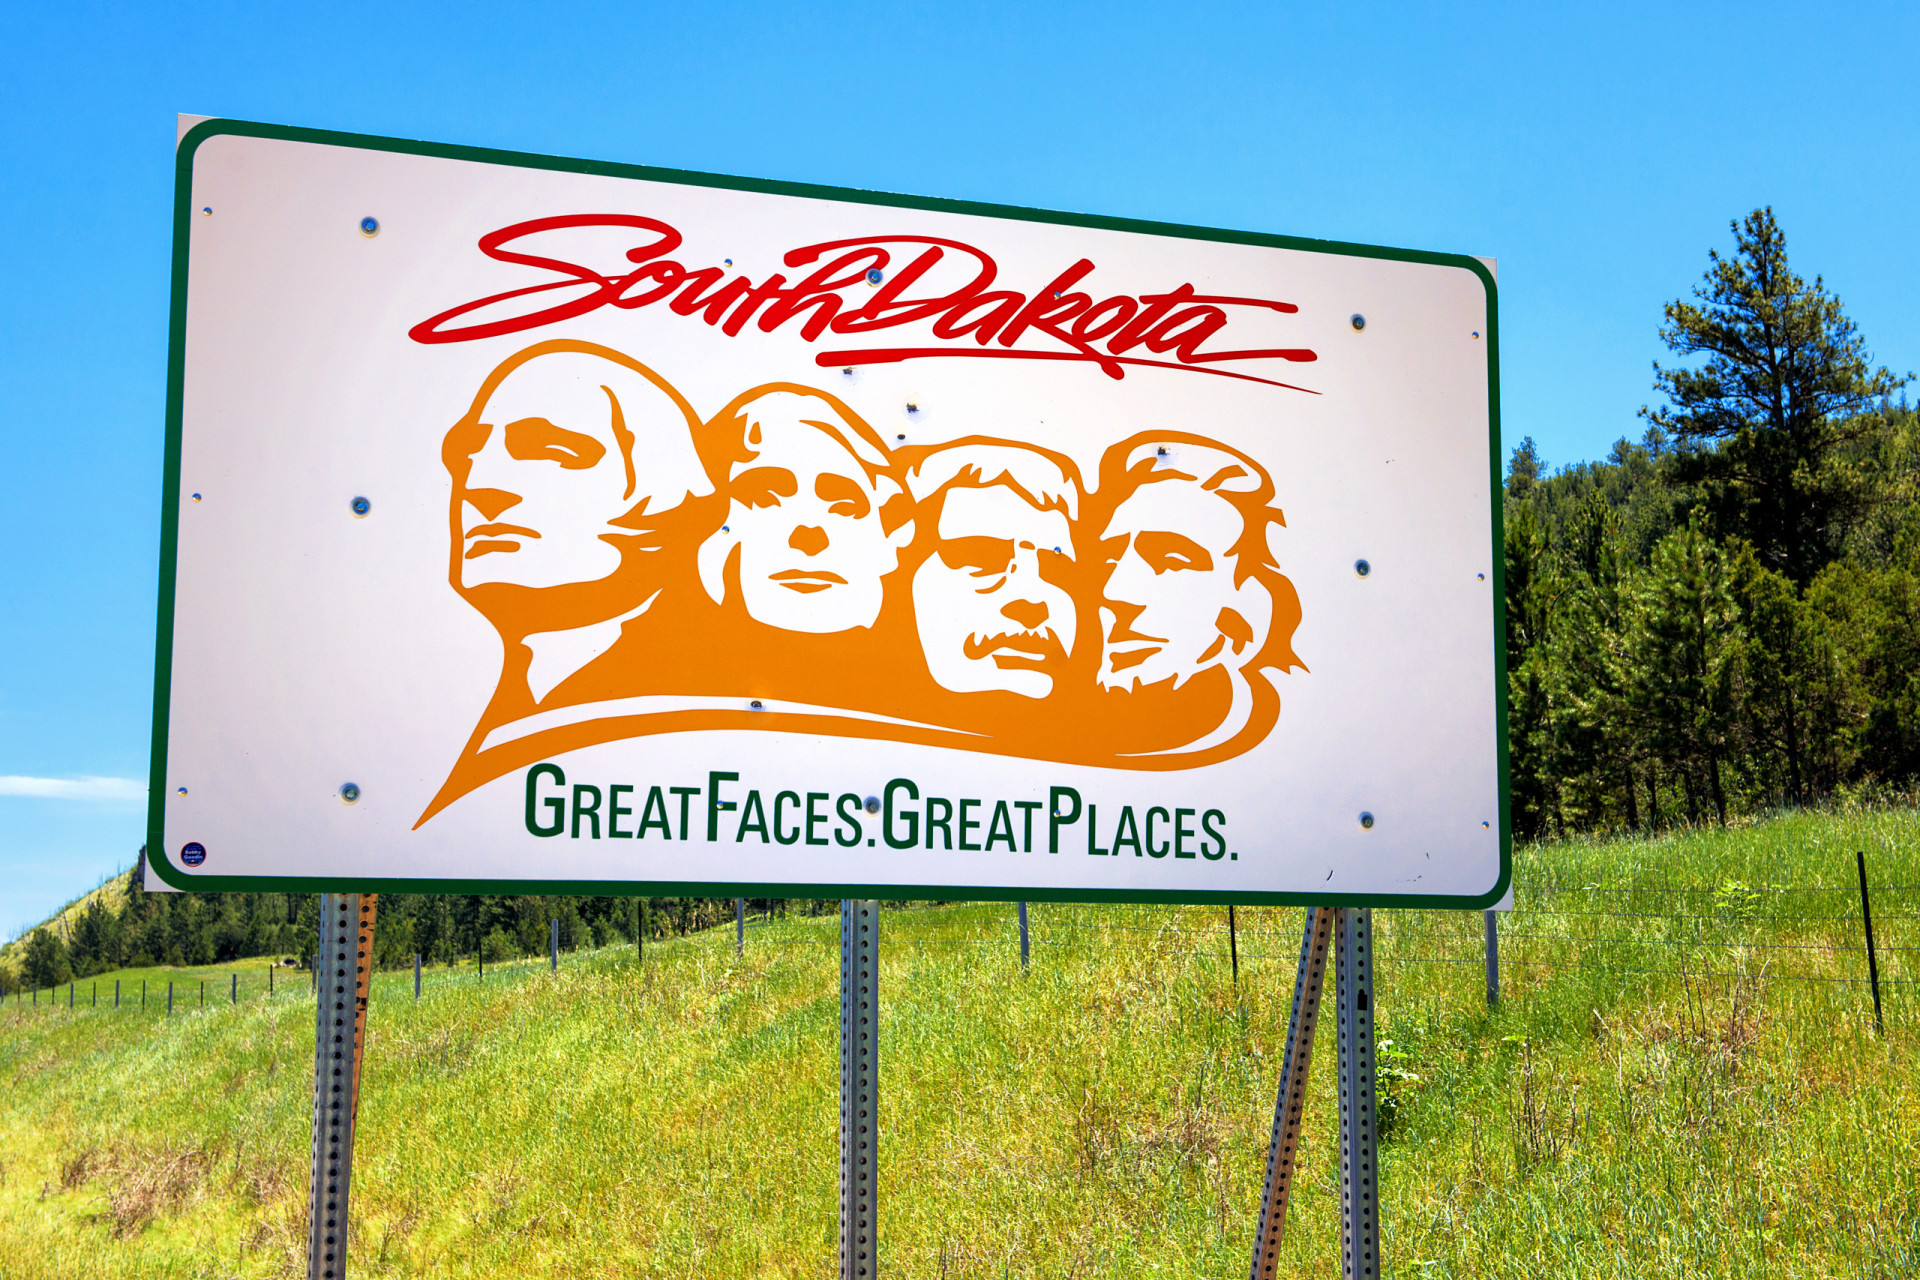 <p>The state welcome sign makes reference to its iconic landmark, Mount Rushmore, where the faces of US presidents George Washington, Thomas Jefferson, Theodore Roosevelt, and Abraham Lincoln, can be found sculpted in rock. </p><p><a href="https://www.msn.com/en-us/community/channel/vid-7xx8mnucu55yw63we9va2gwr7uihbxwc68fxqp25x6tg4ftibpra?cvid=94631541bc0f4f89bfd59158d696ad7e">Follow us and access great exclusive content every day</a></p>